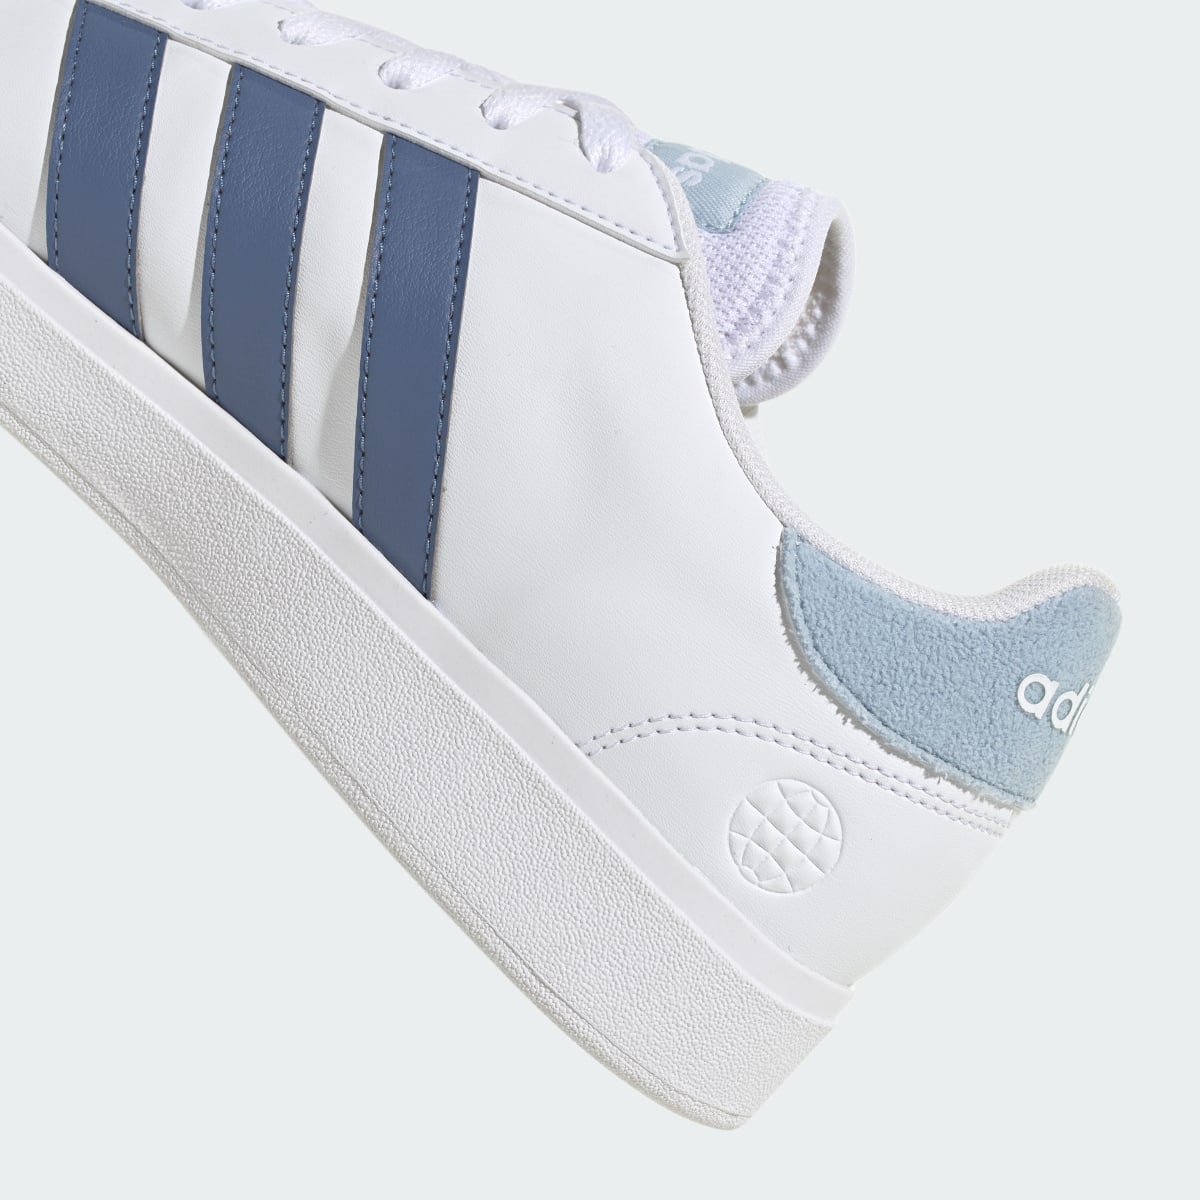 Adidas Grand Court TD Lifestyle Court Casual Shoes. 11